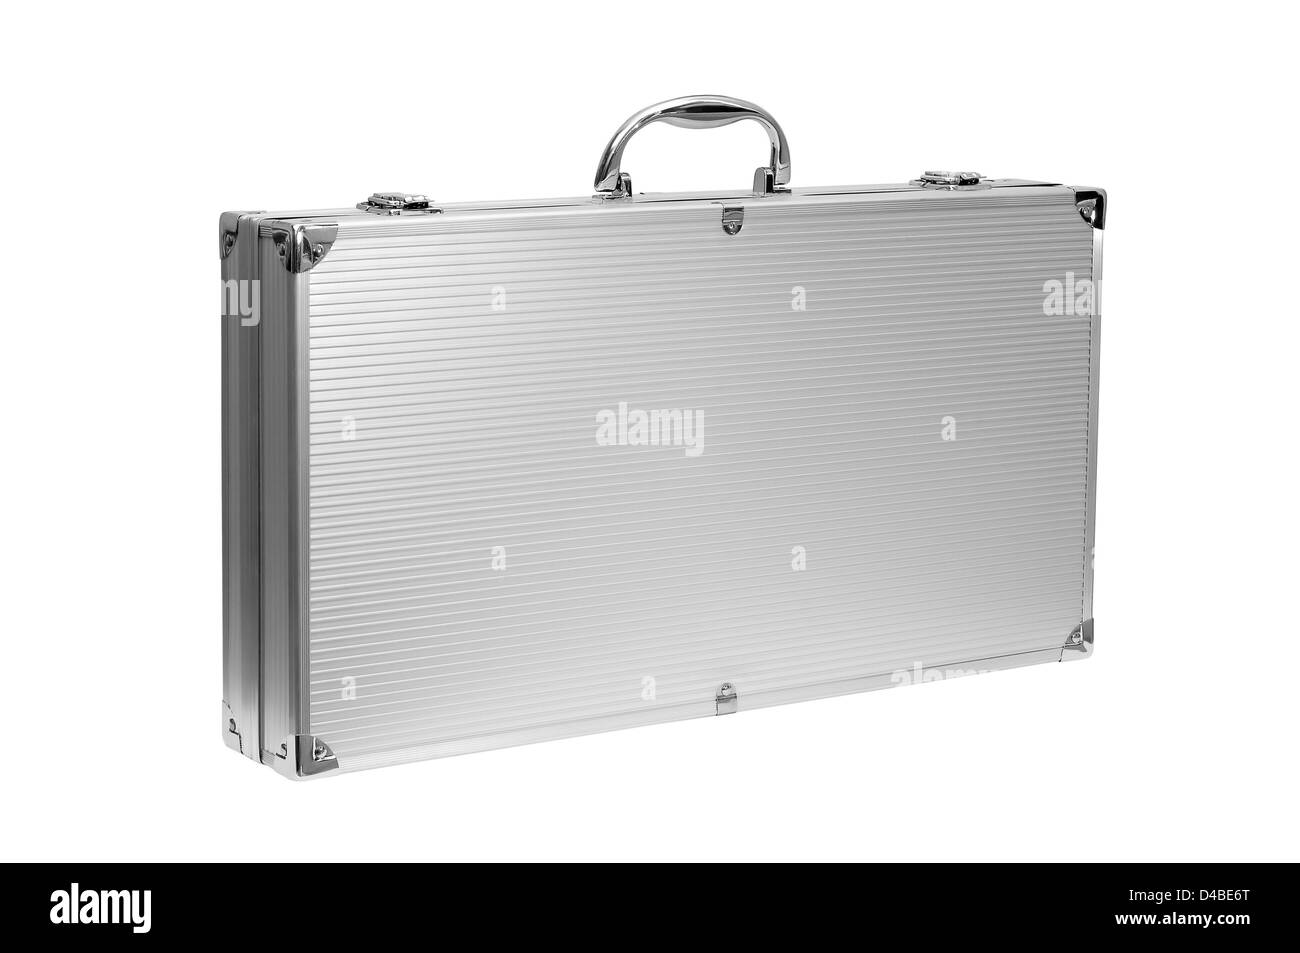 The metal suitcase is photographed on a white background Stock Photo